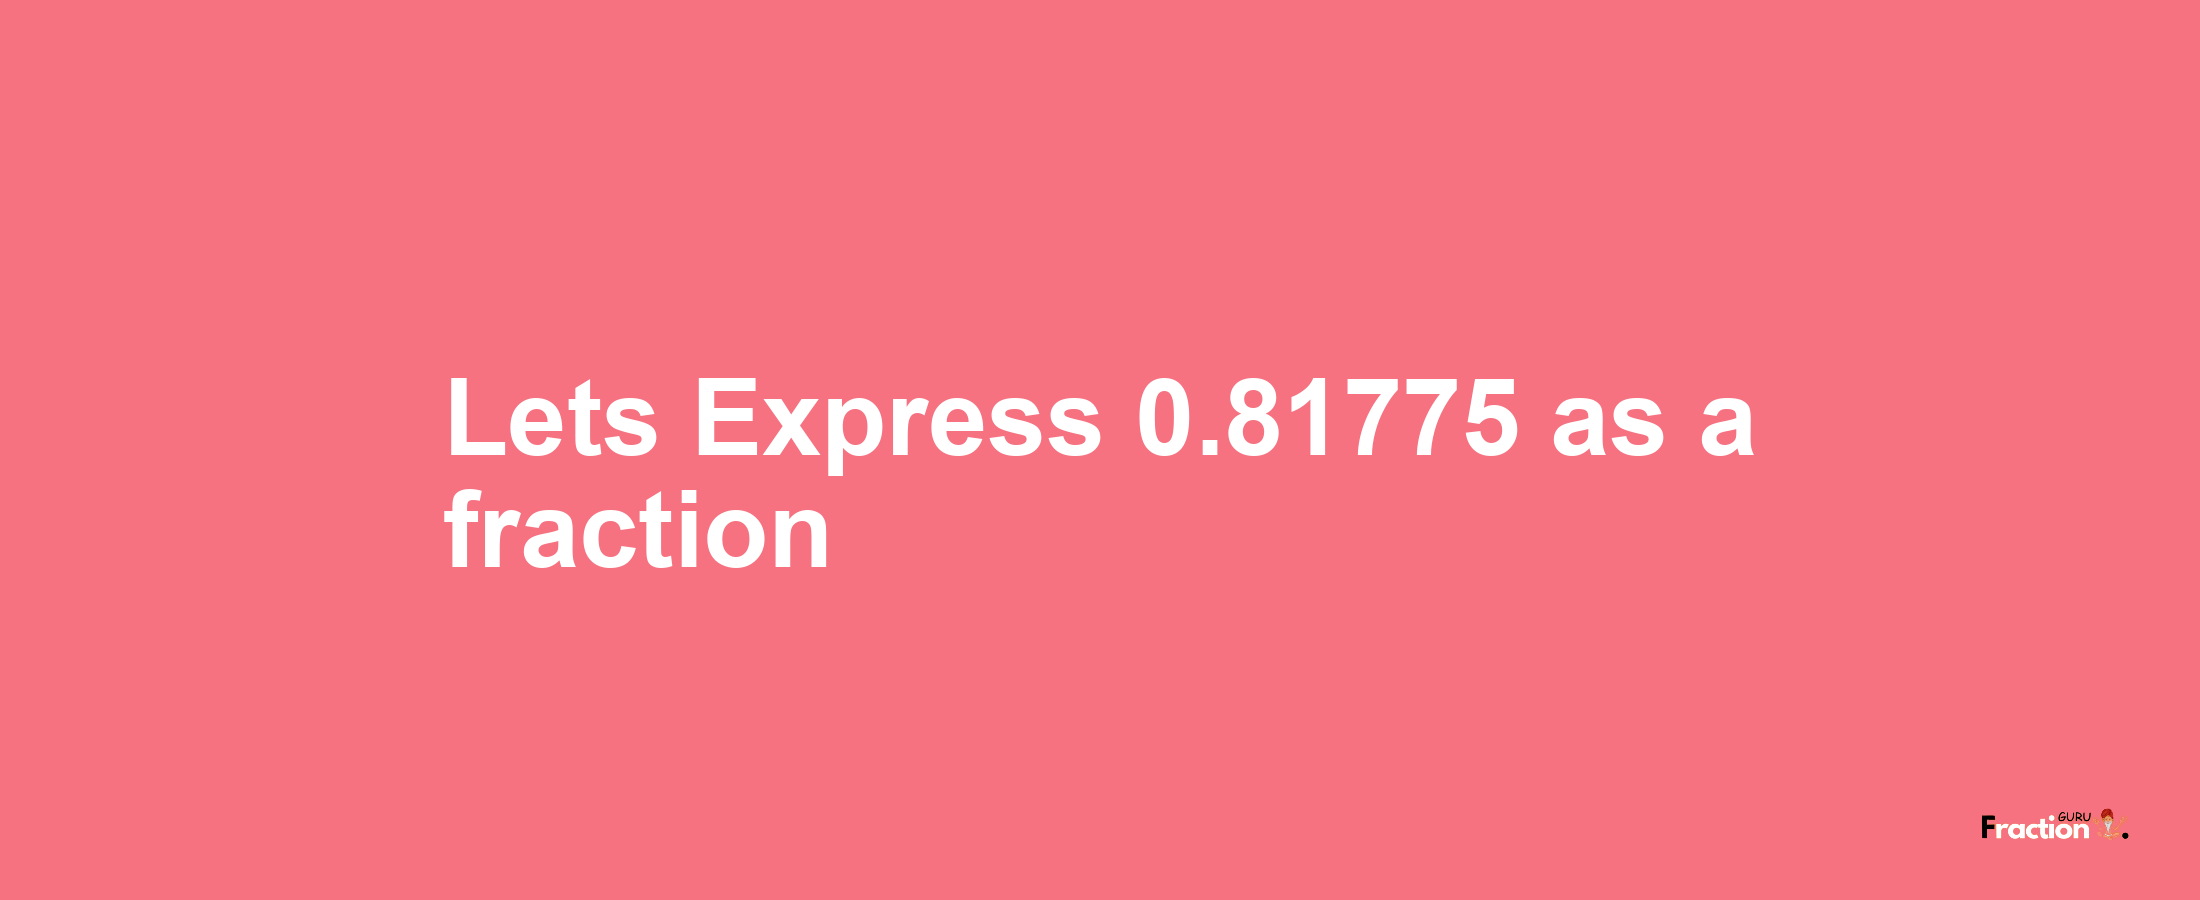 Lets Express 0.81775 as afraction